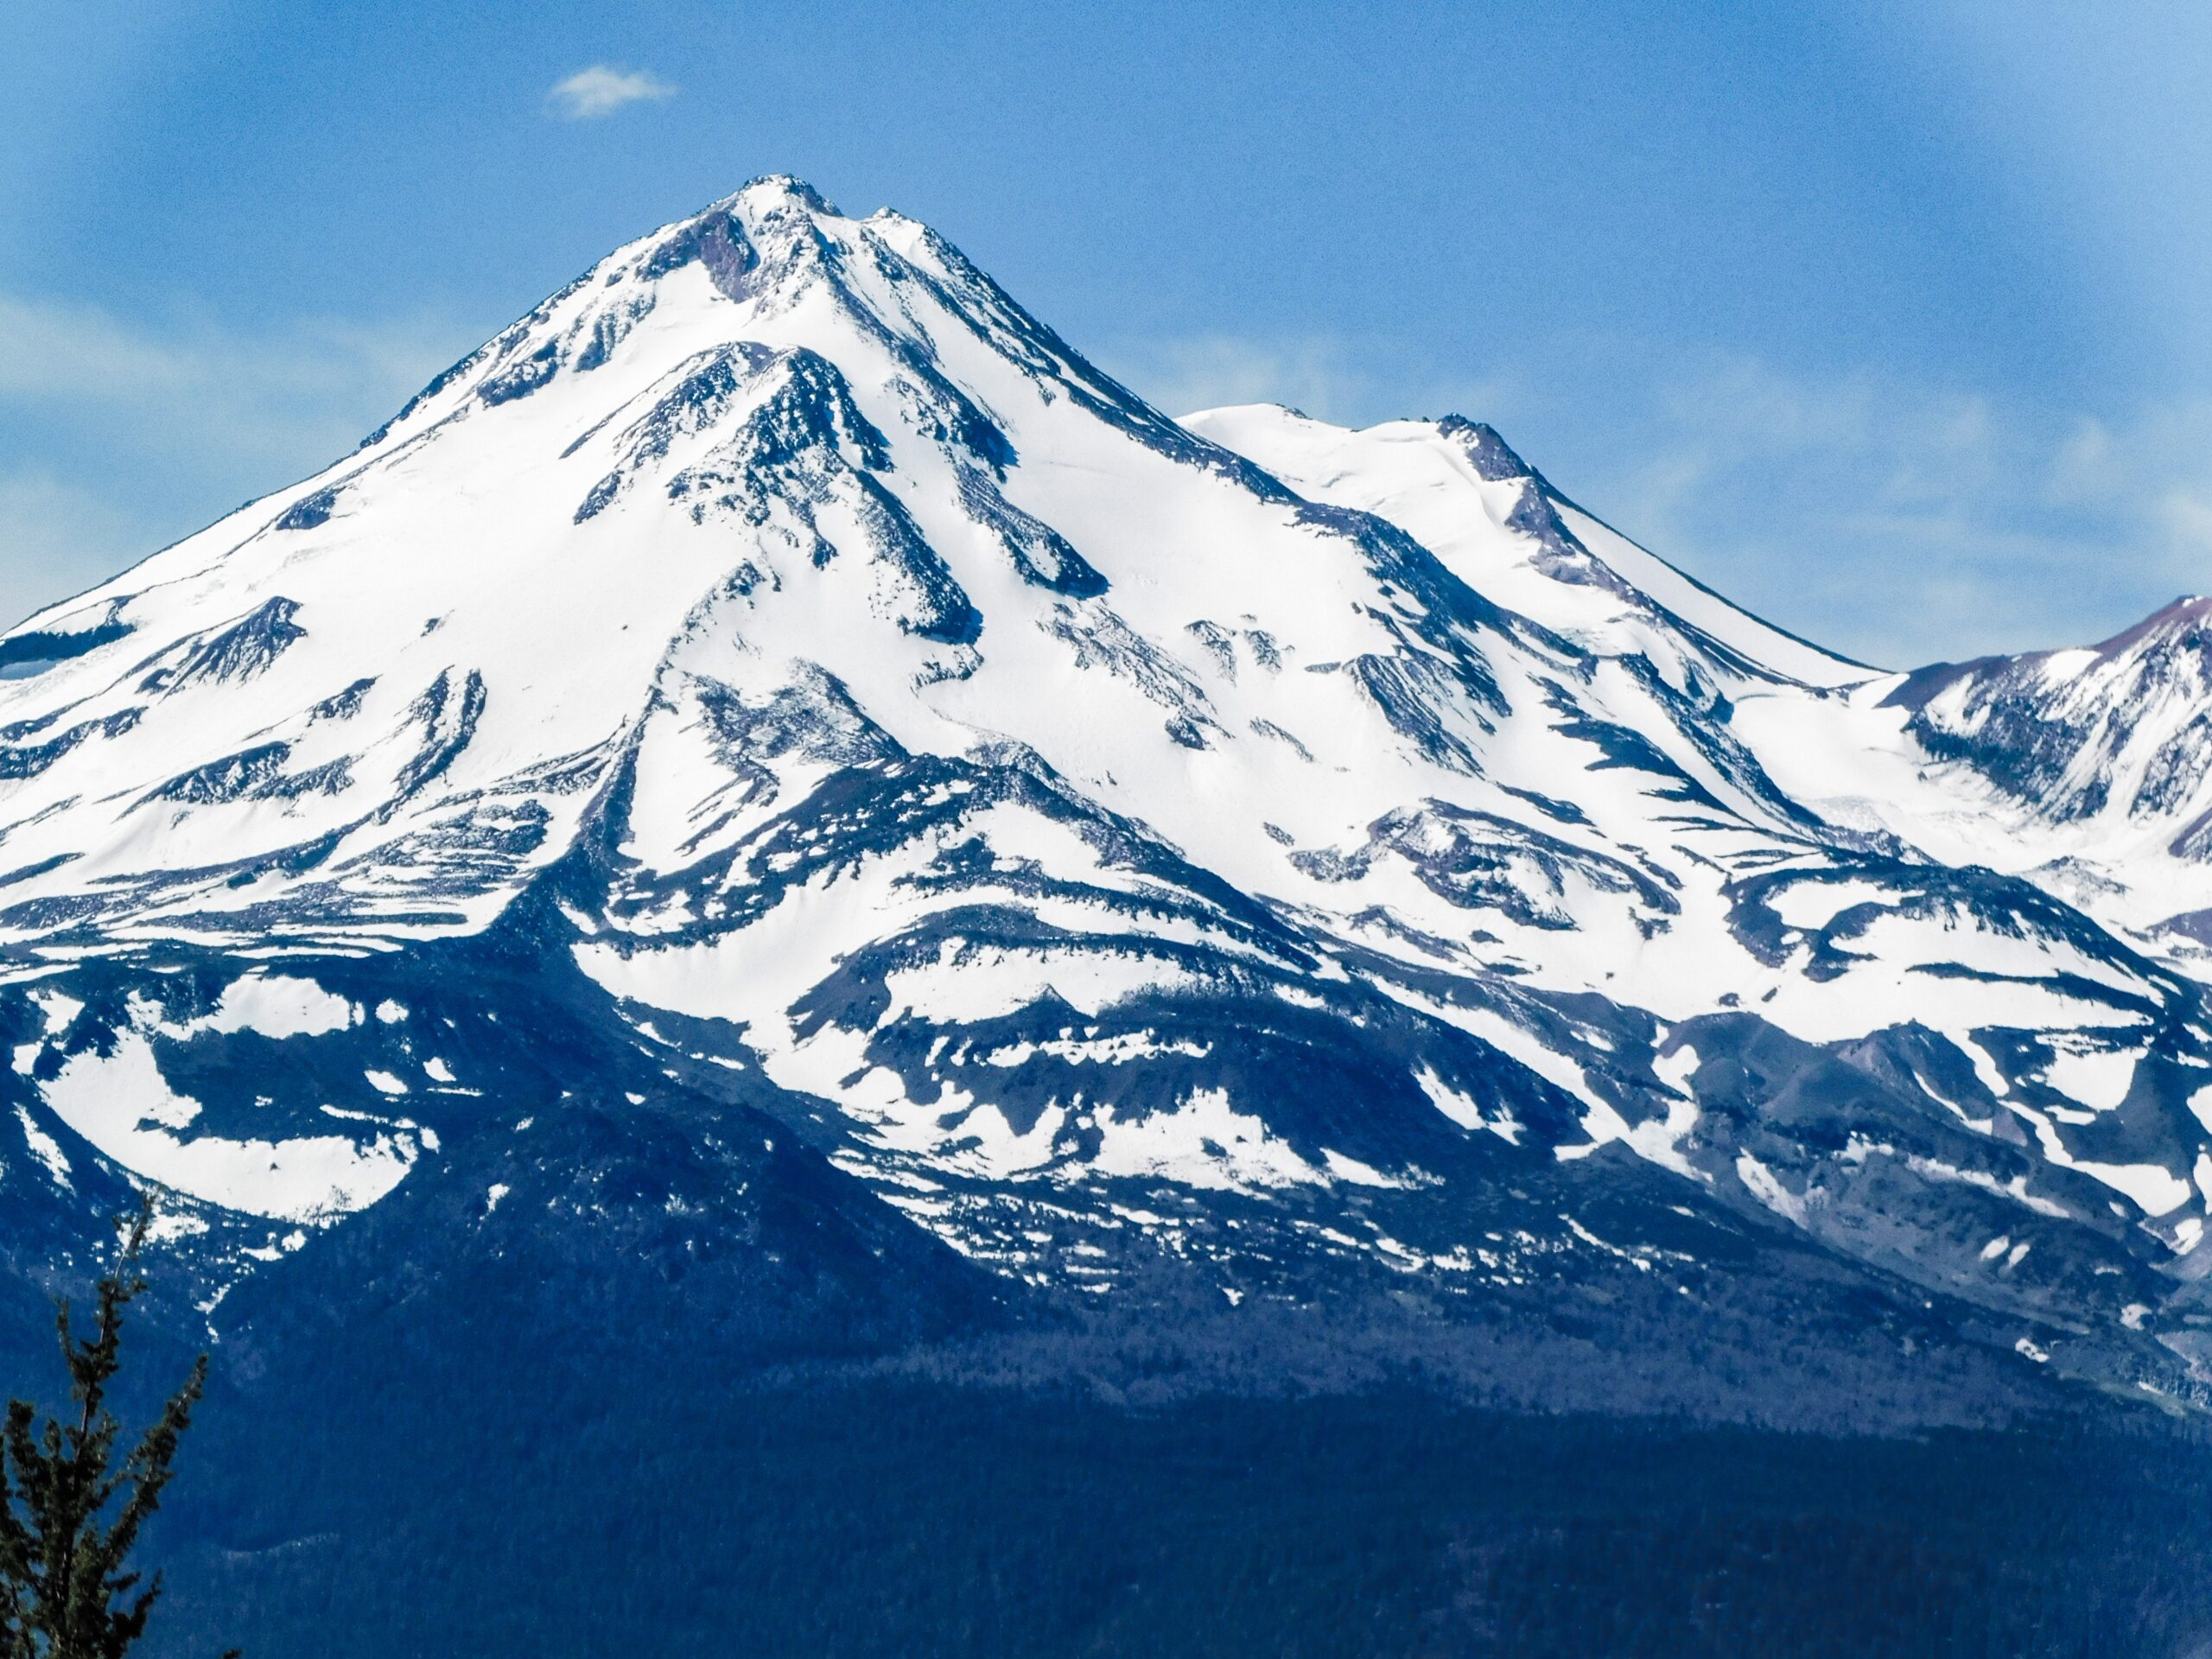 Are There Any Rescue Insurance Options Available For Climbing Mount Shasta?